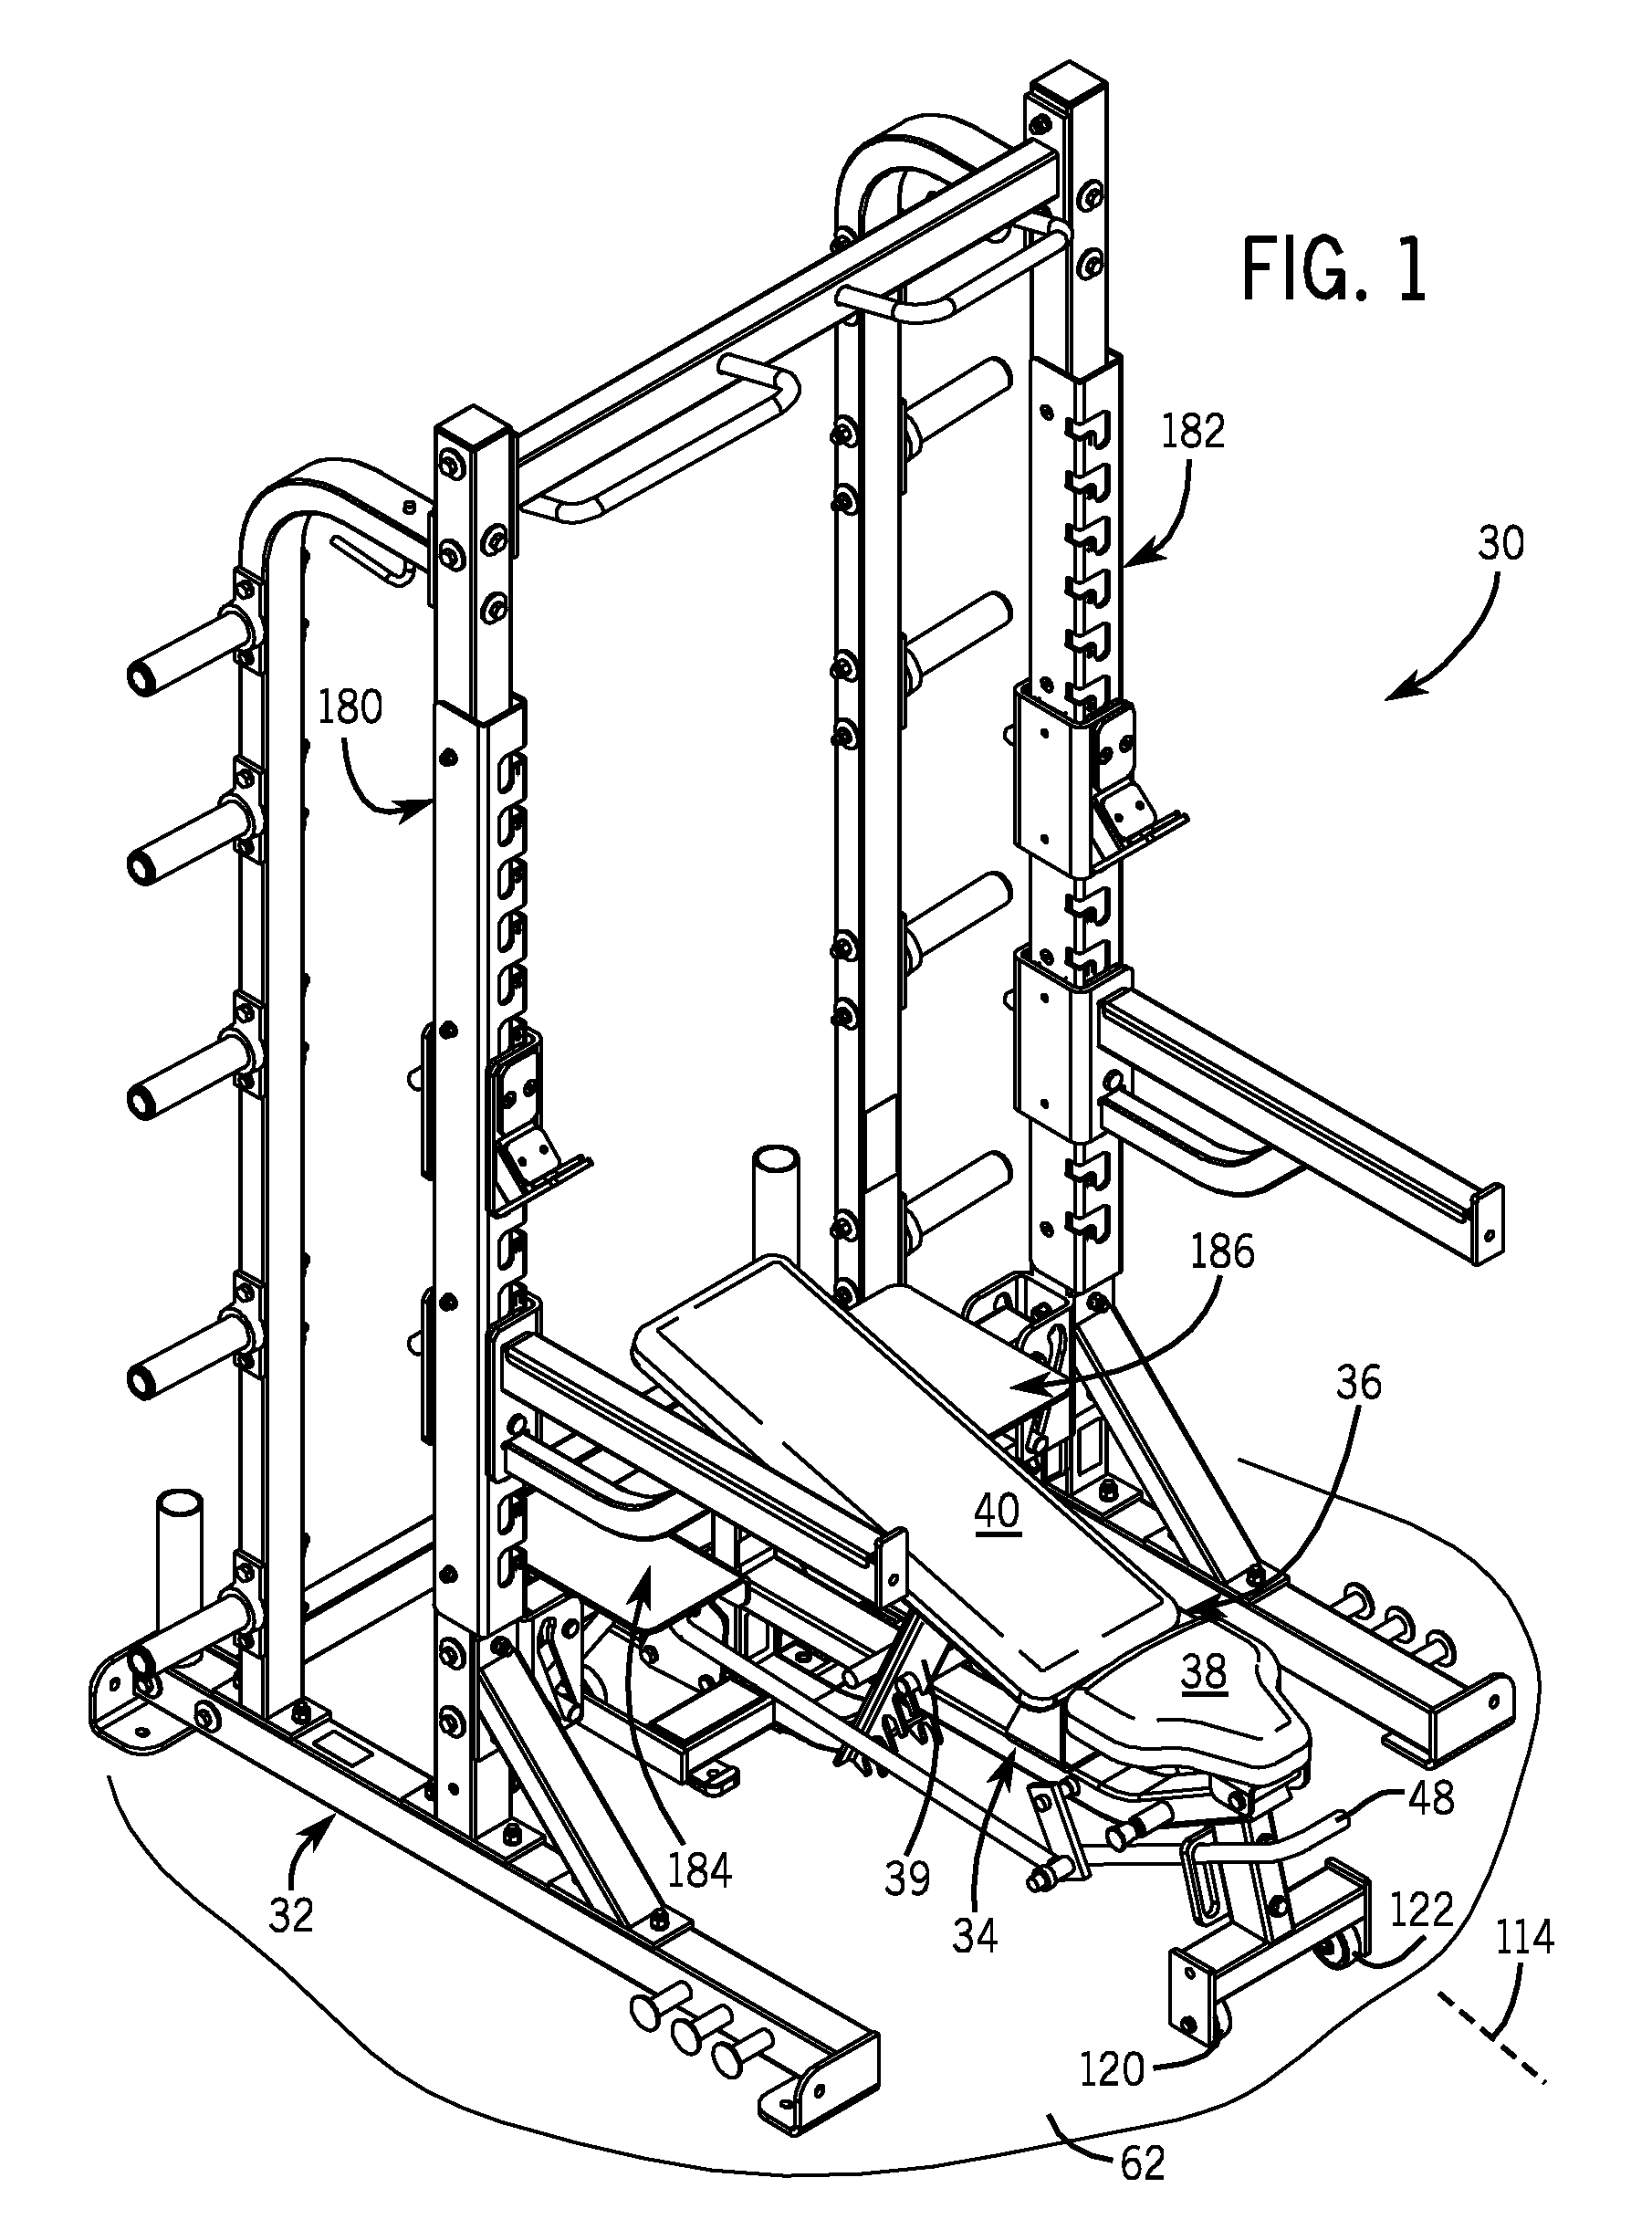 Exercise equipment with dock-and-lock and spotter platform